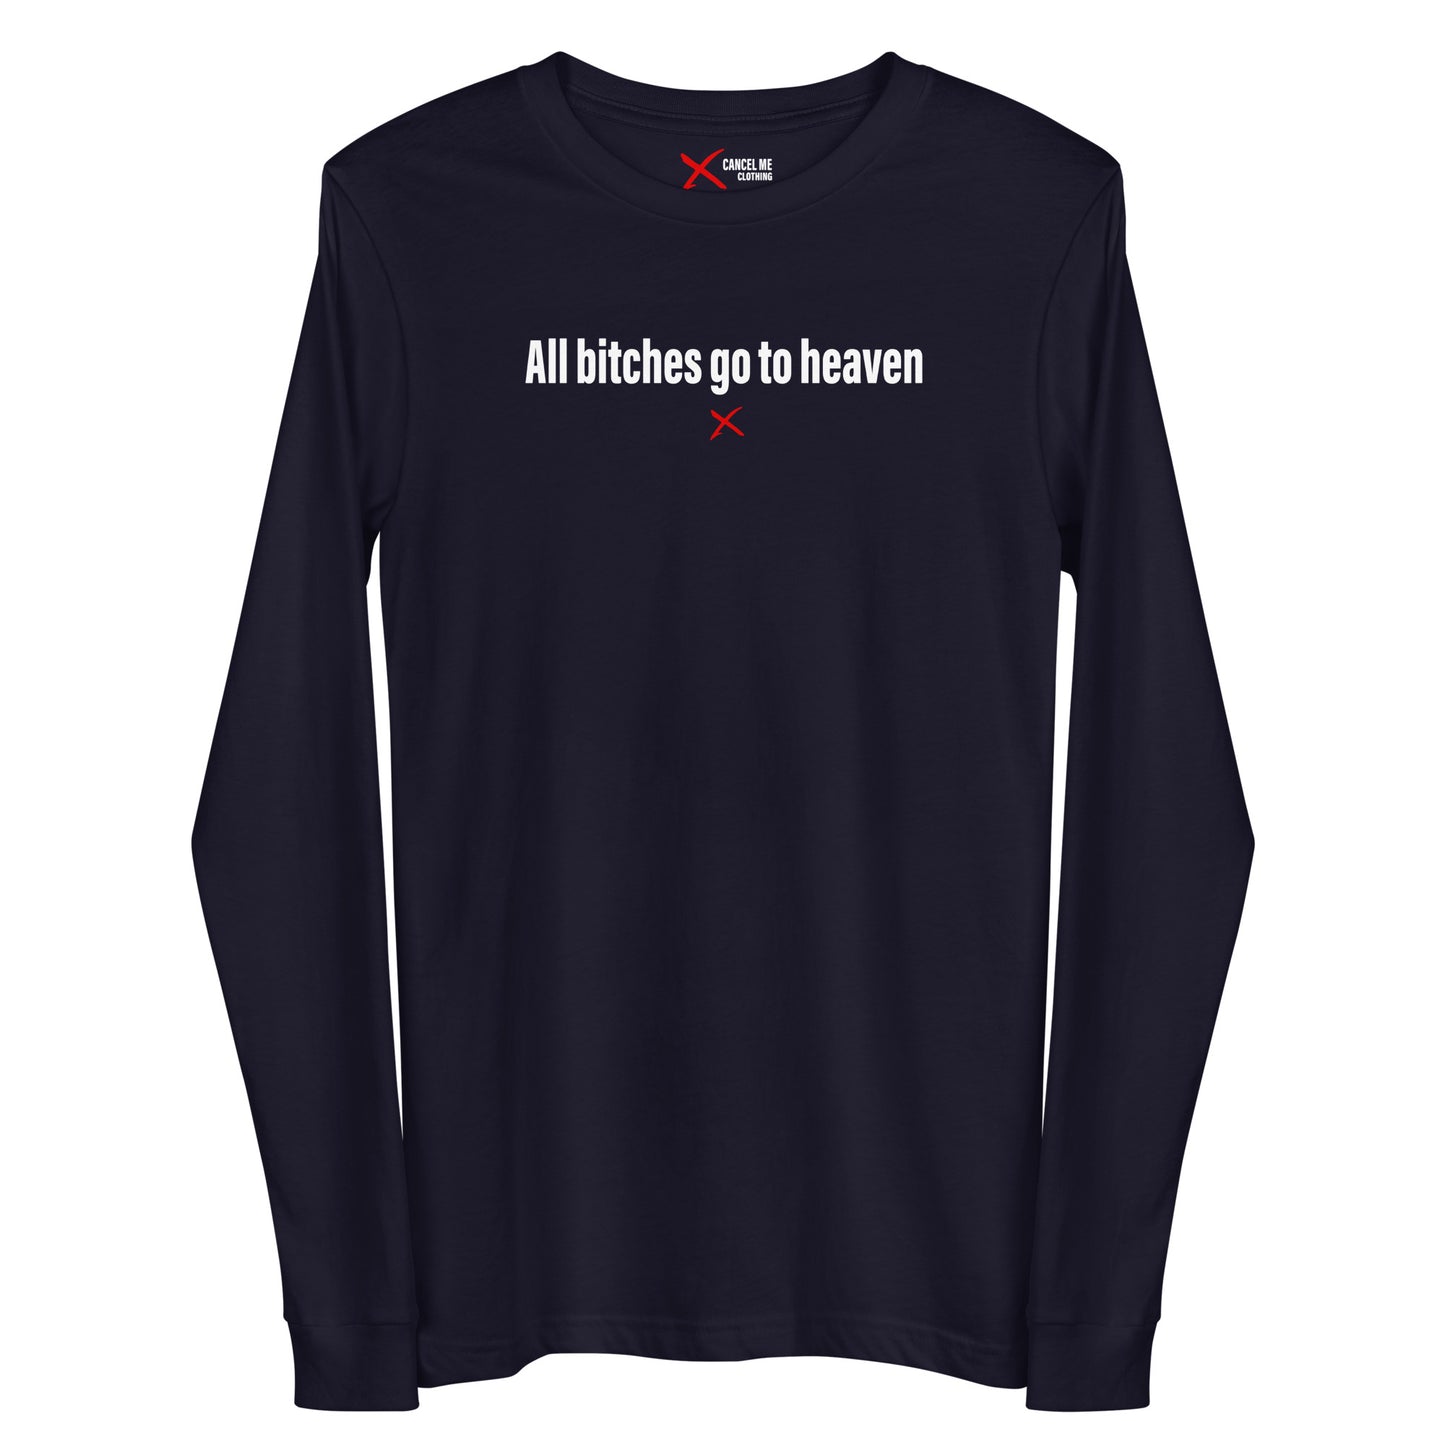 All bitches go to heaven - Longsleeve